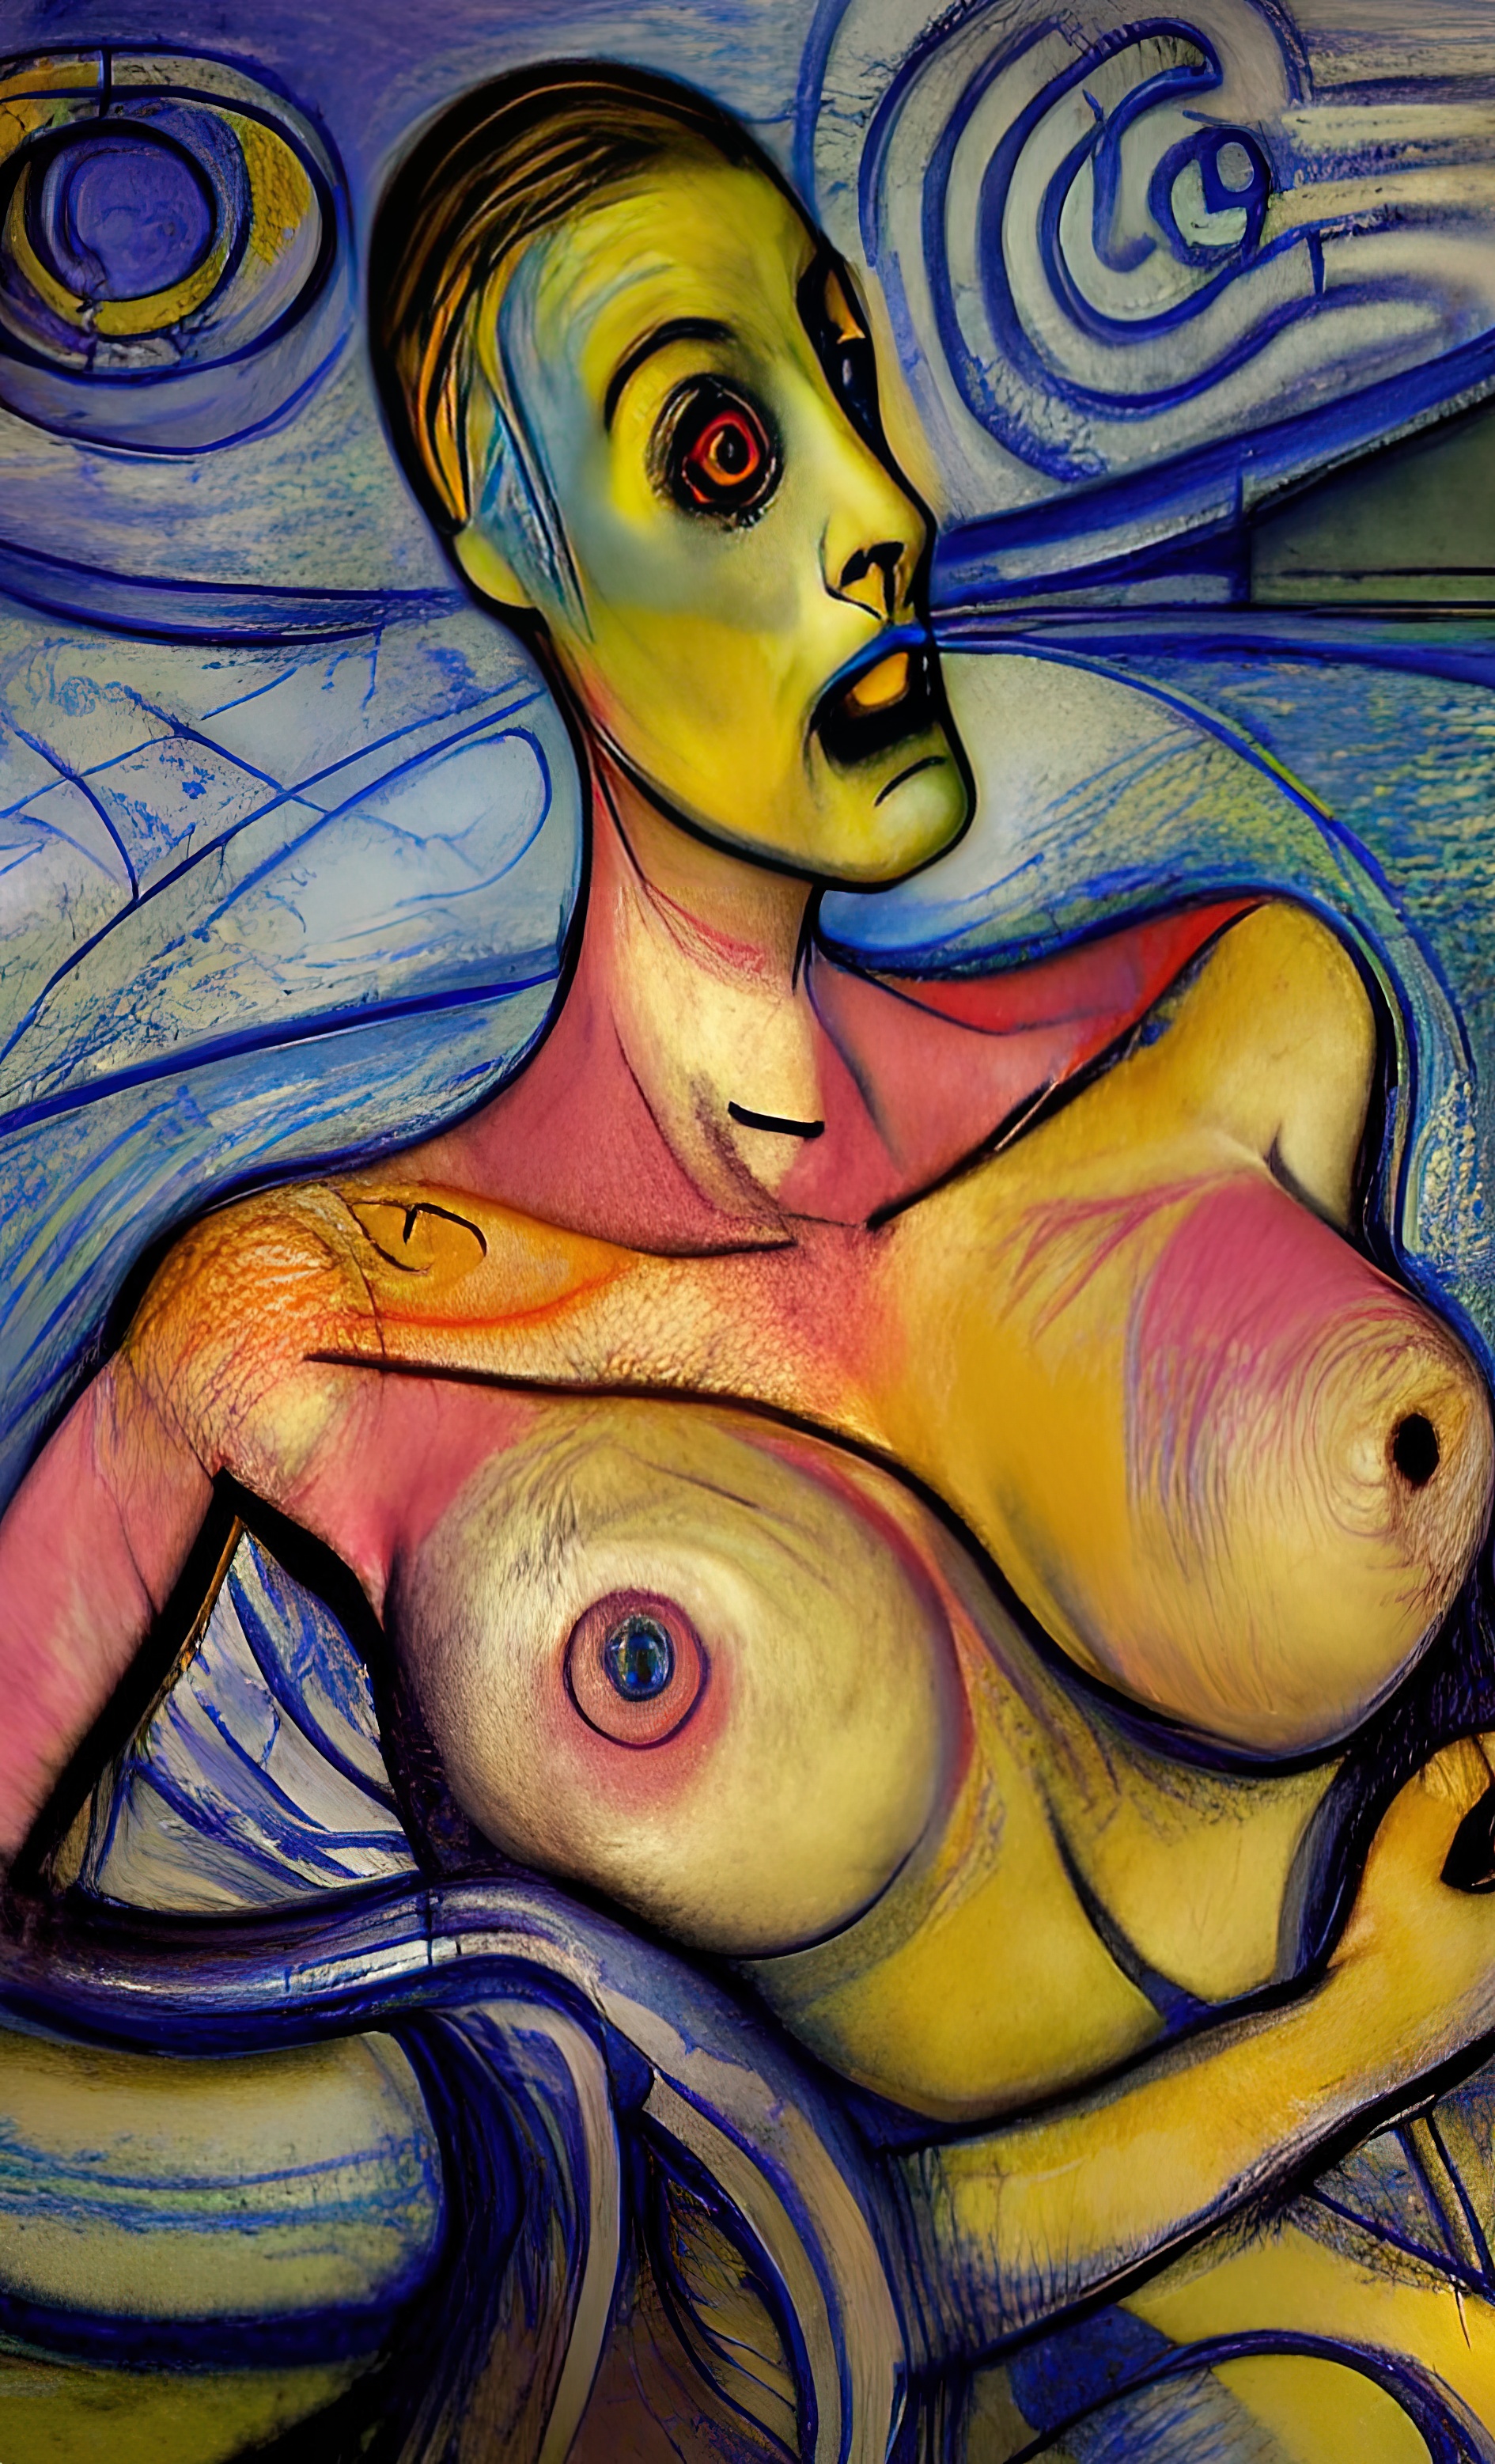 'Naked Yellow Woman' |Paolo Galleri|